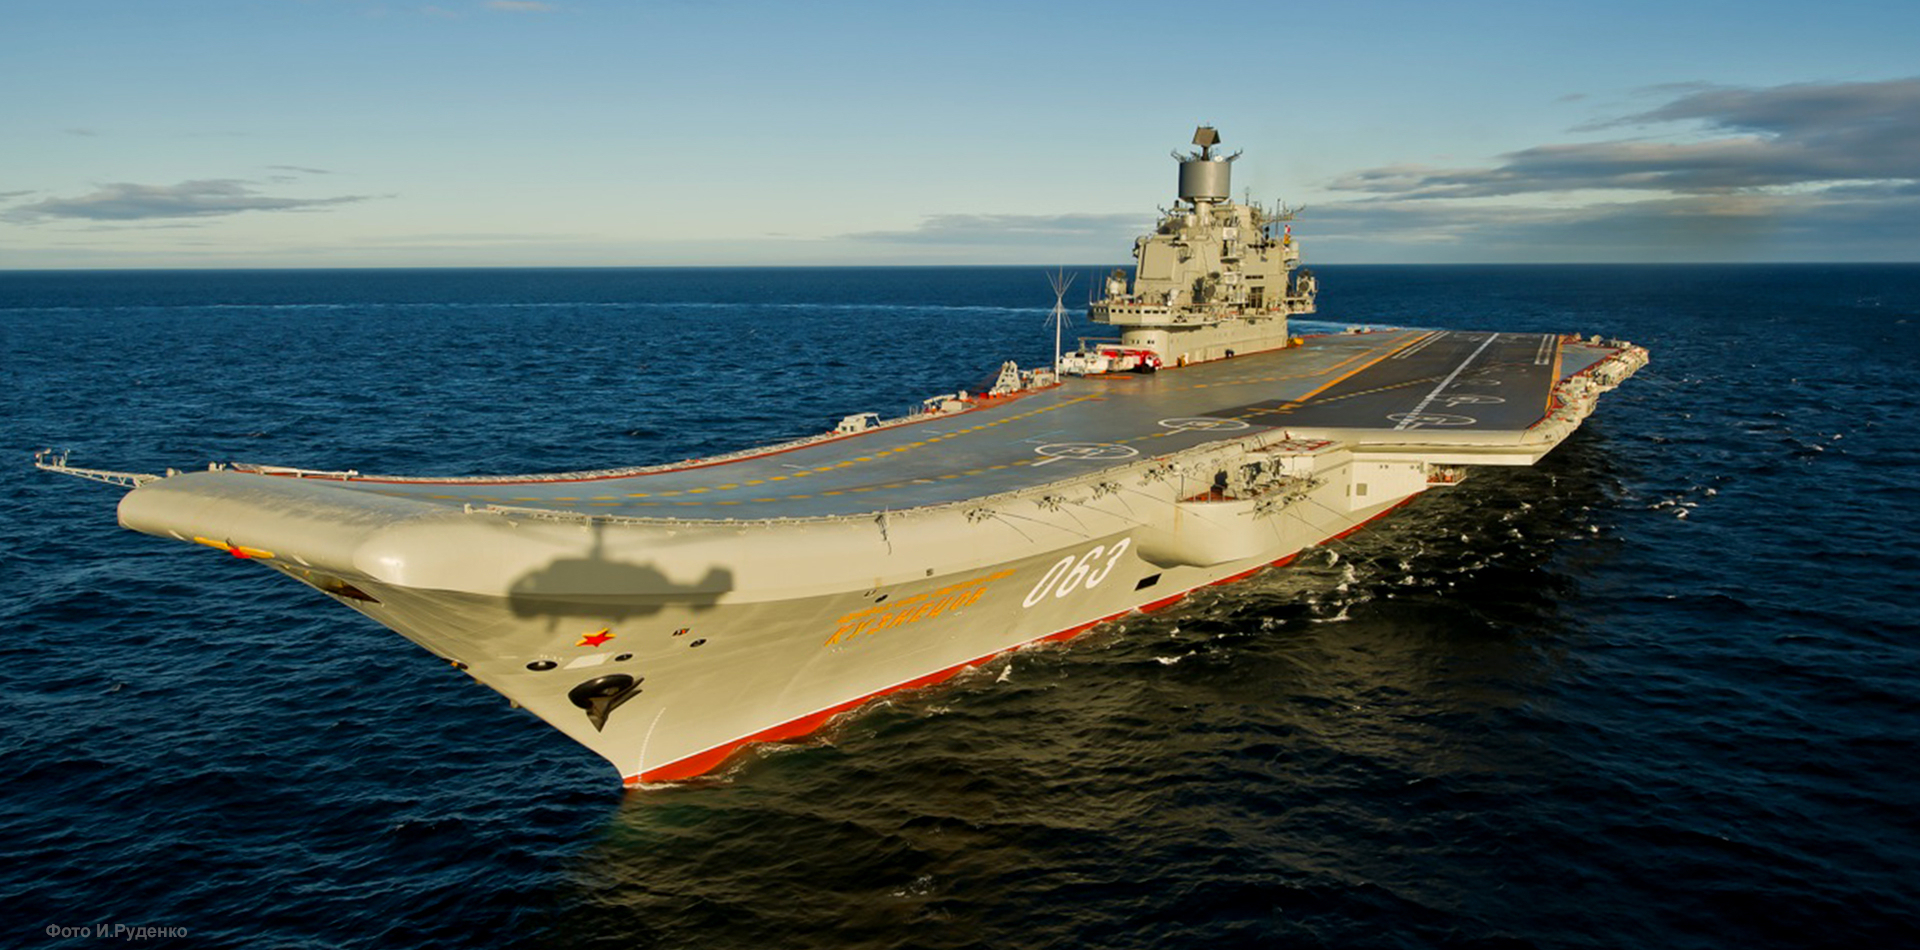 Admiral Kuznetsov aircraft carrier in 2012. Russian Ministry of Defense Photo